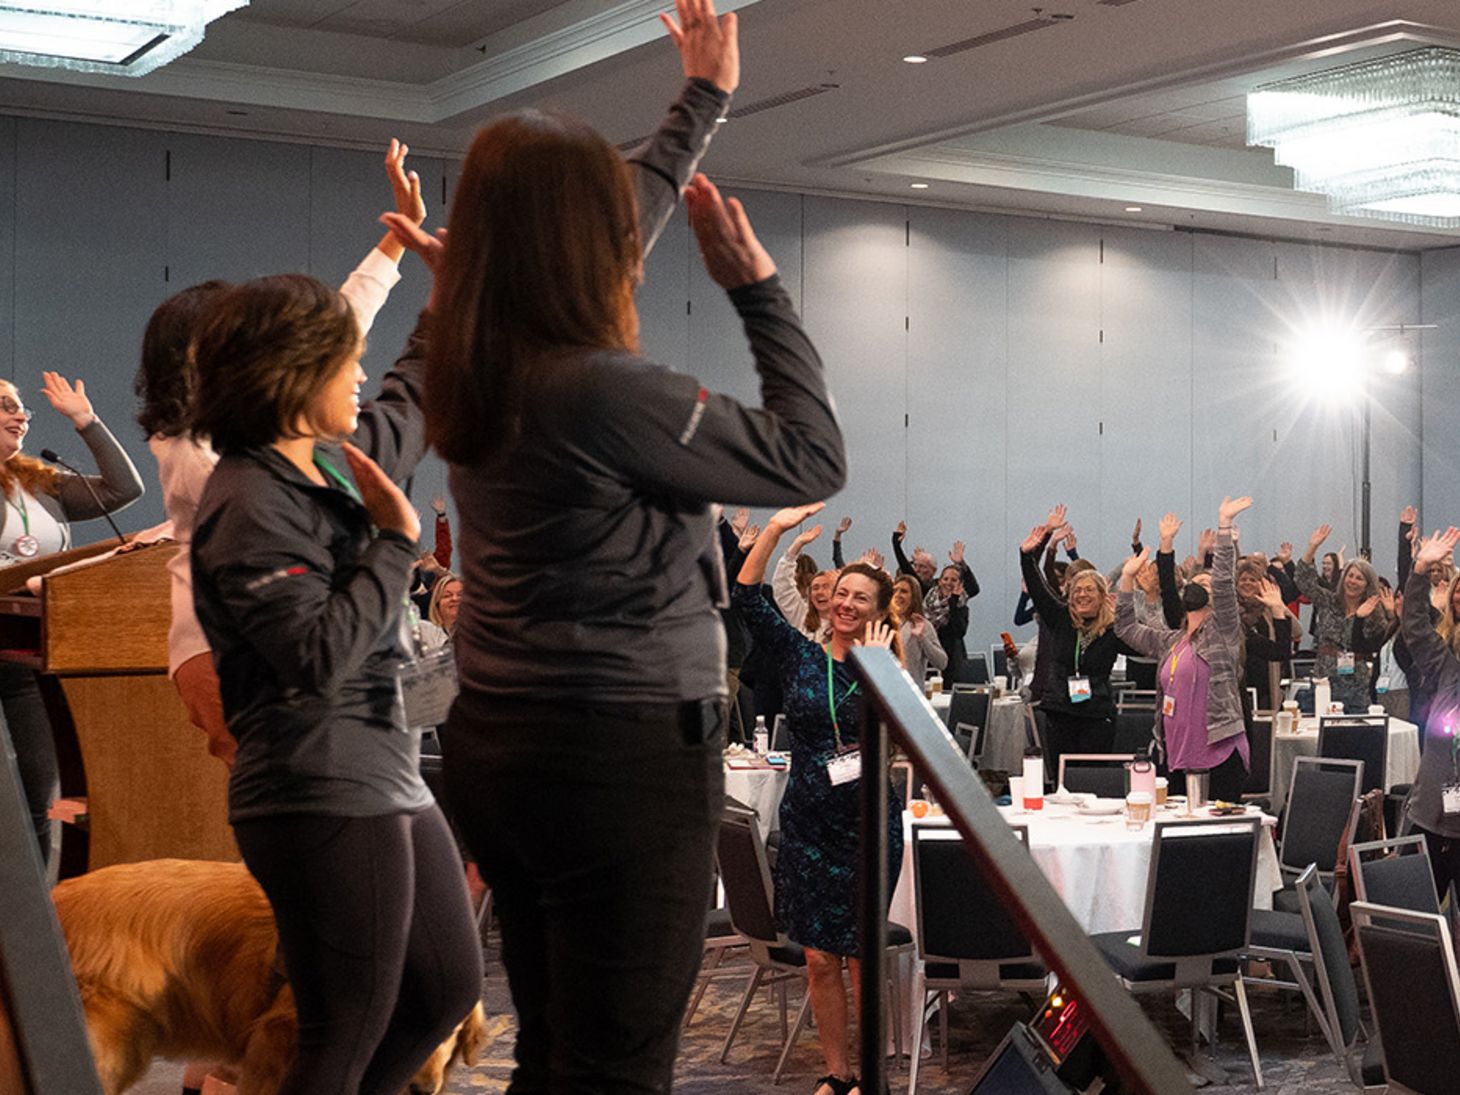 Summit attendees participating in a wellness exercise